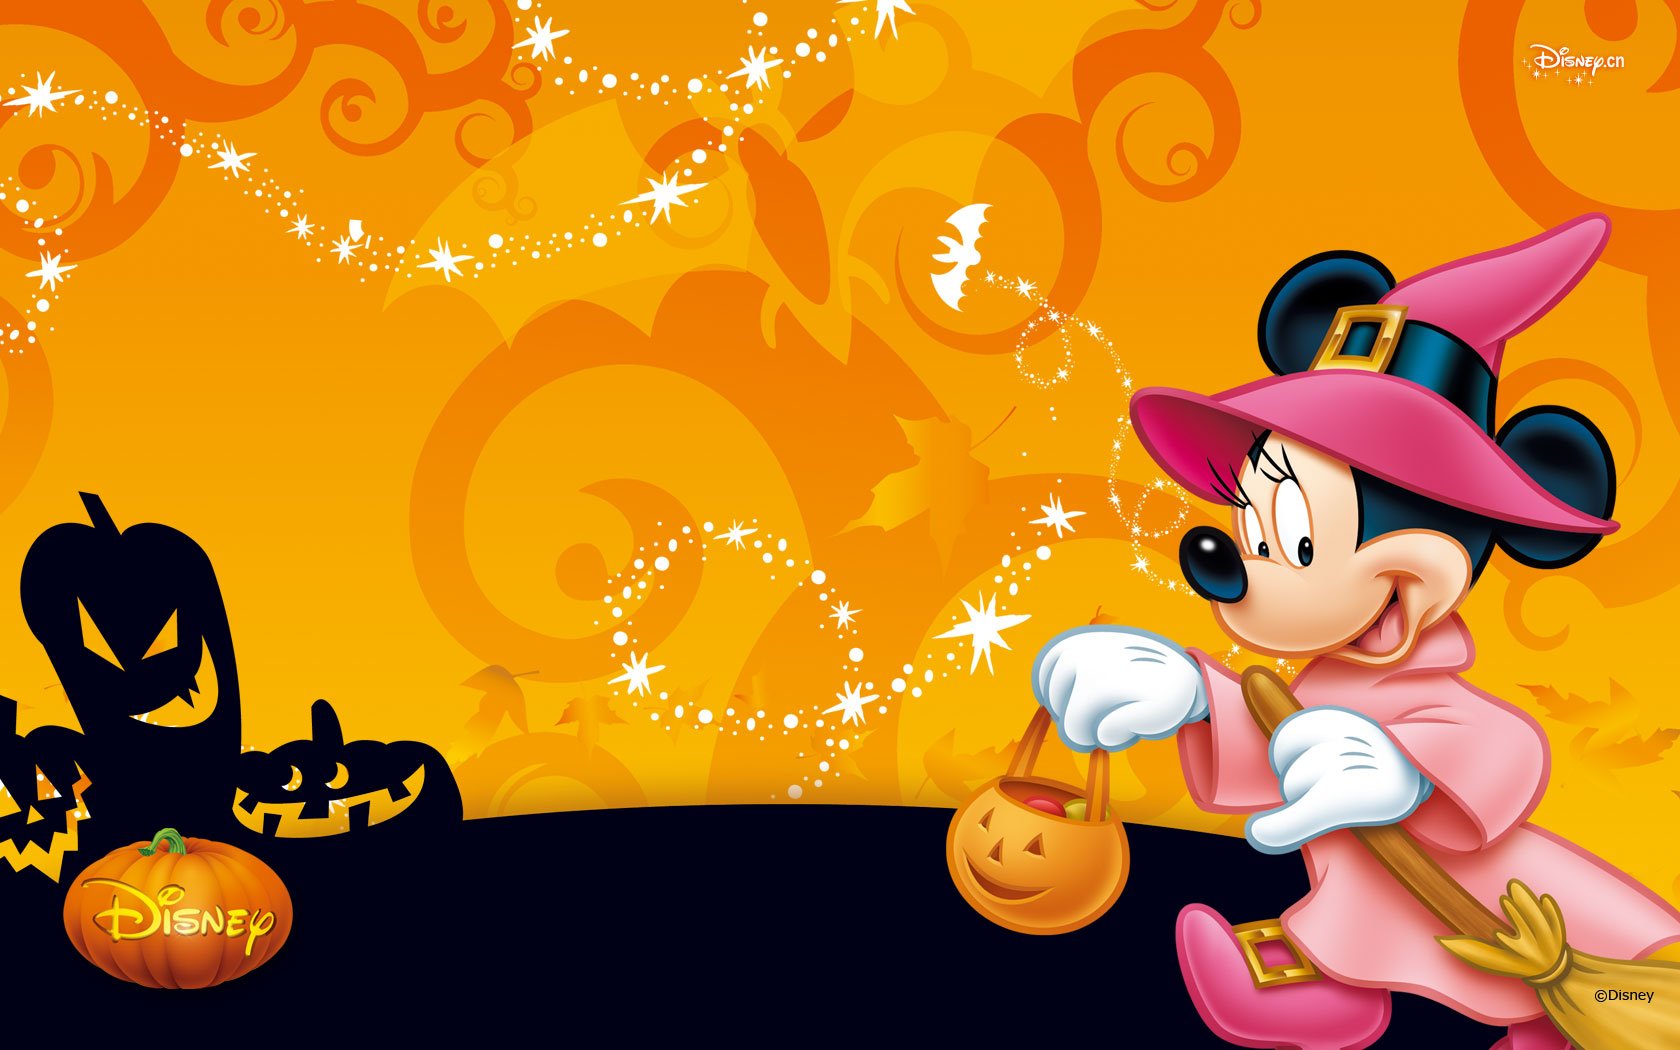 Fall Mickey Mouse Wallpaper